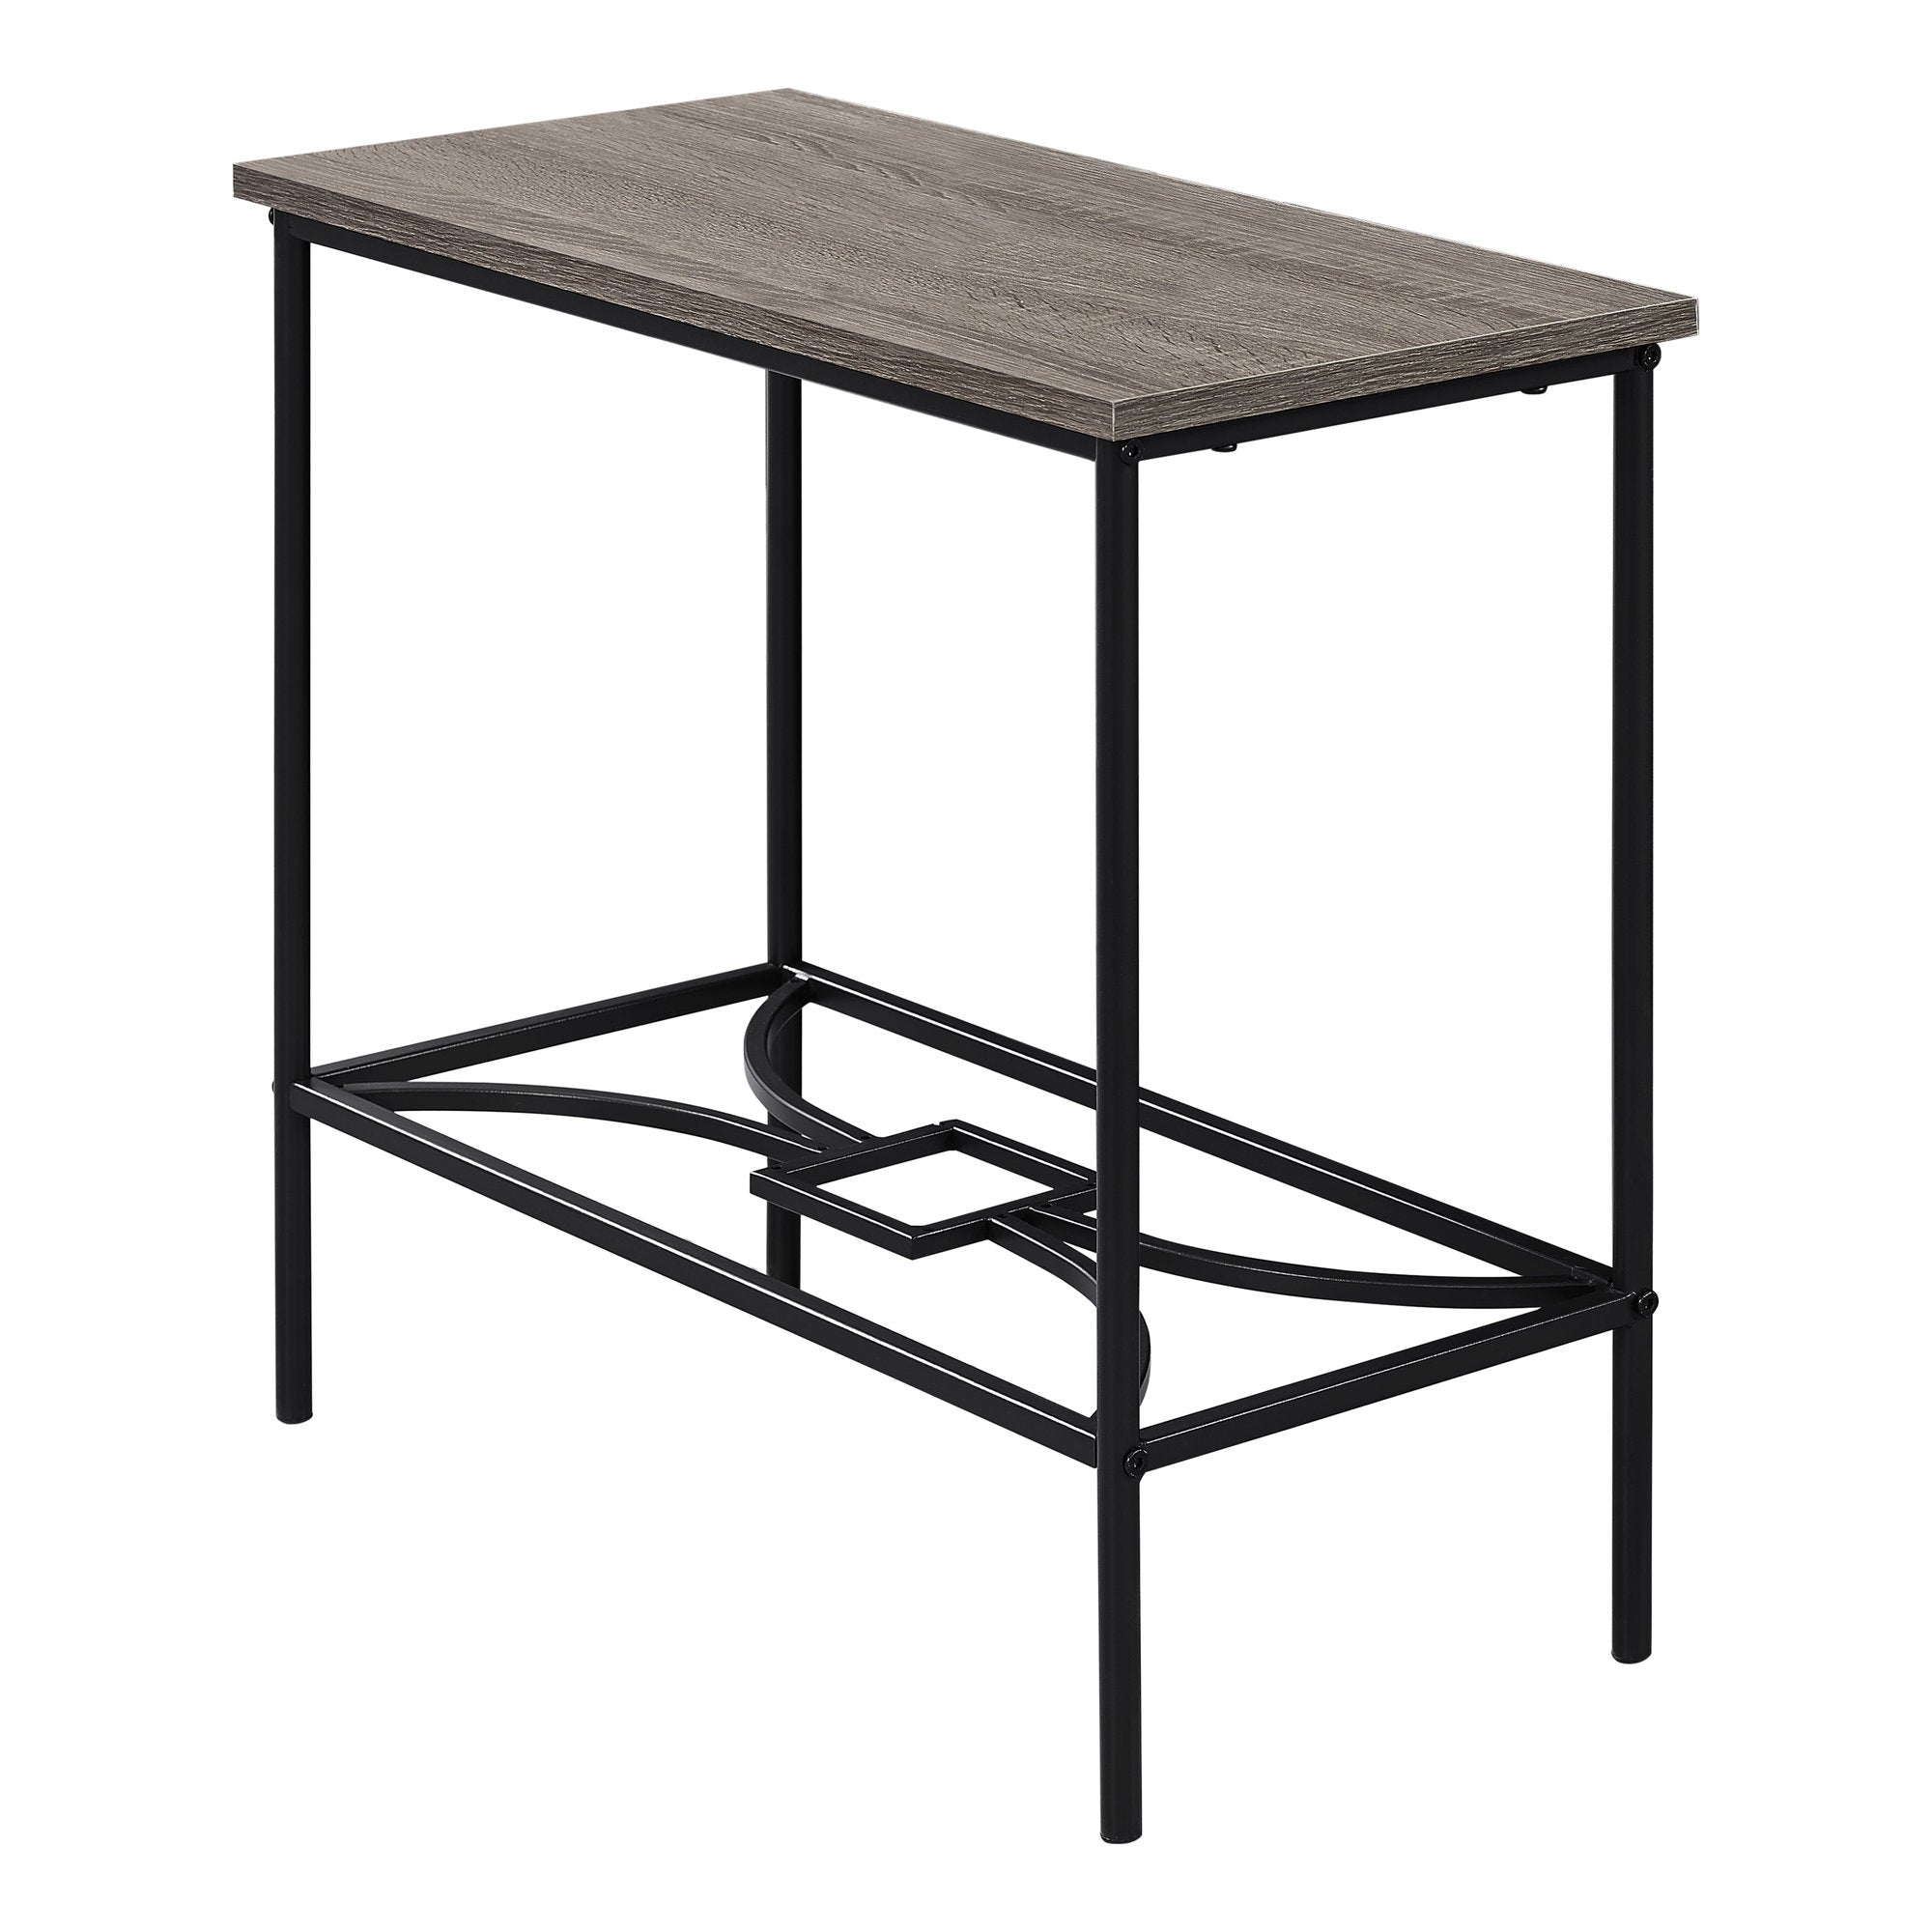 MN-822075    Accent Table, Side, End, Narrow, Small, Living Room, Bedroom, 2 Tier, Metal Legs, Laminate, Dark Taupe, Black, Contemporary, Modern